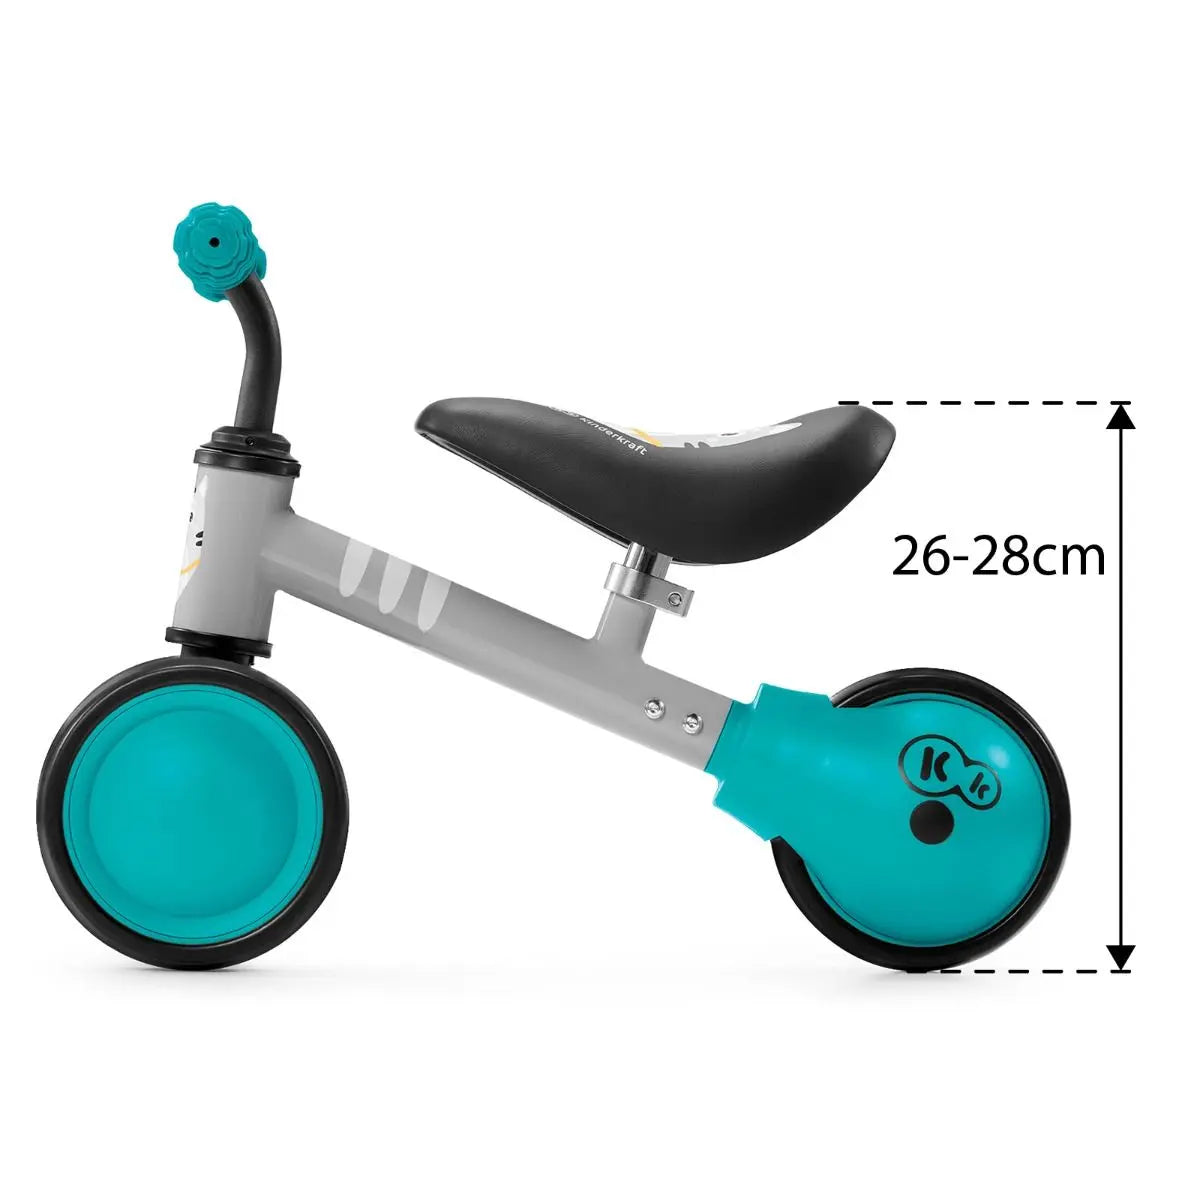 A blue and black balance bike with a kitten print, adjustable saddle, rubber handles, ball-bearing rear wheel, and a strong steel frame for safe and fun play.